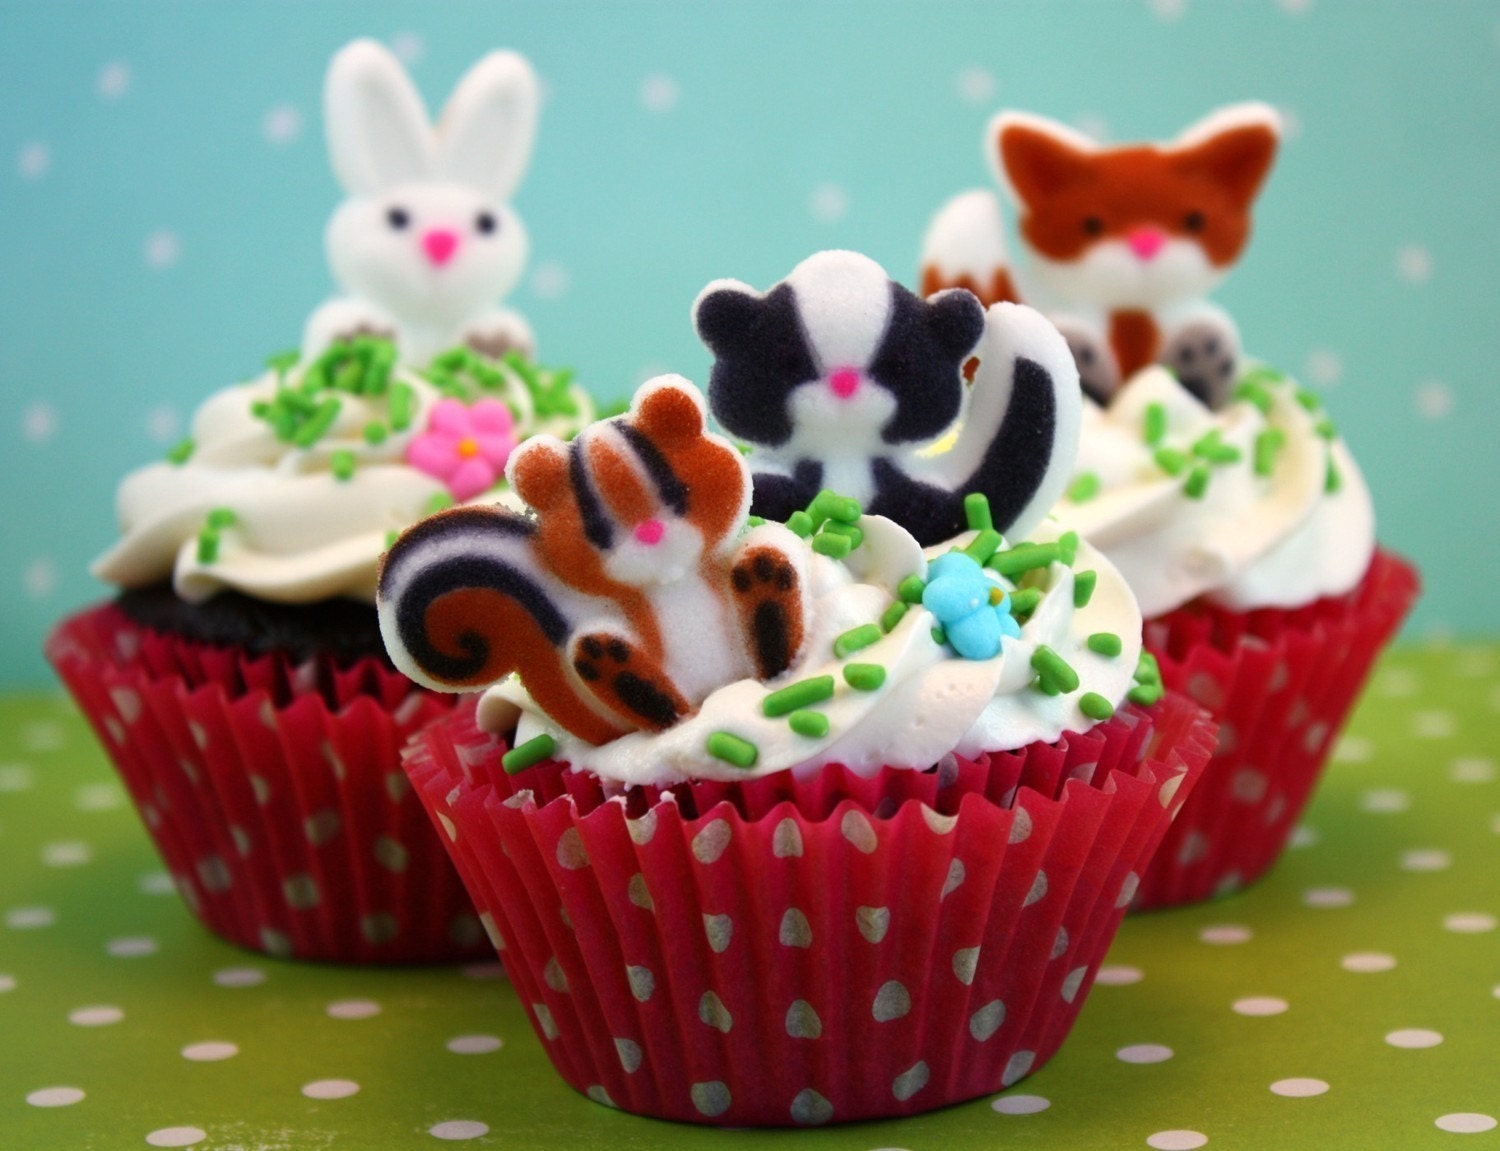 10 Woodland Friends Sugar Decorations for your Desserts